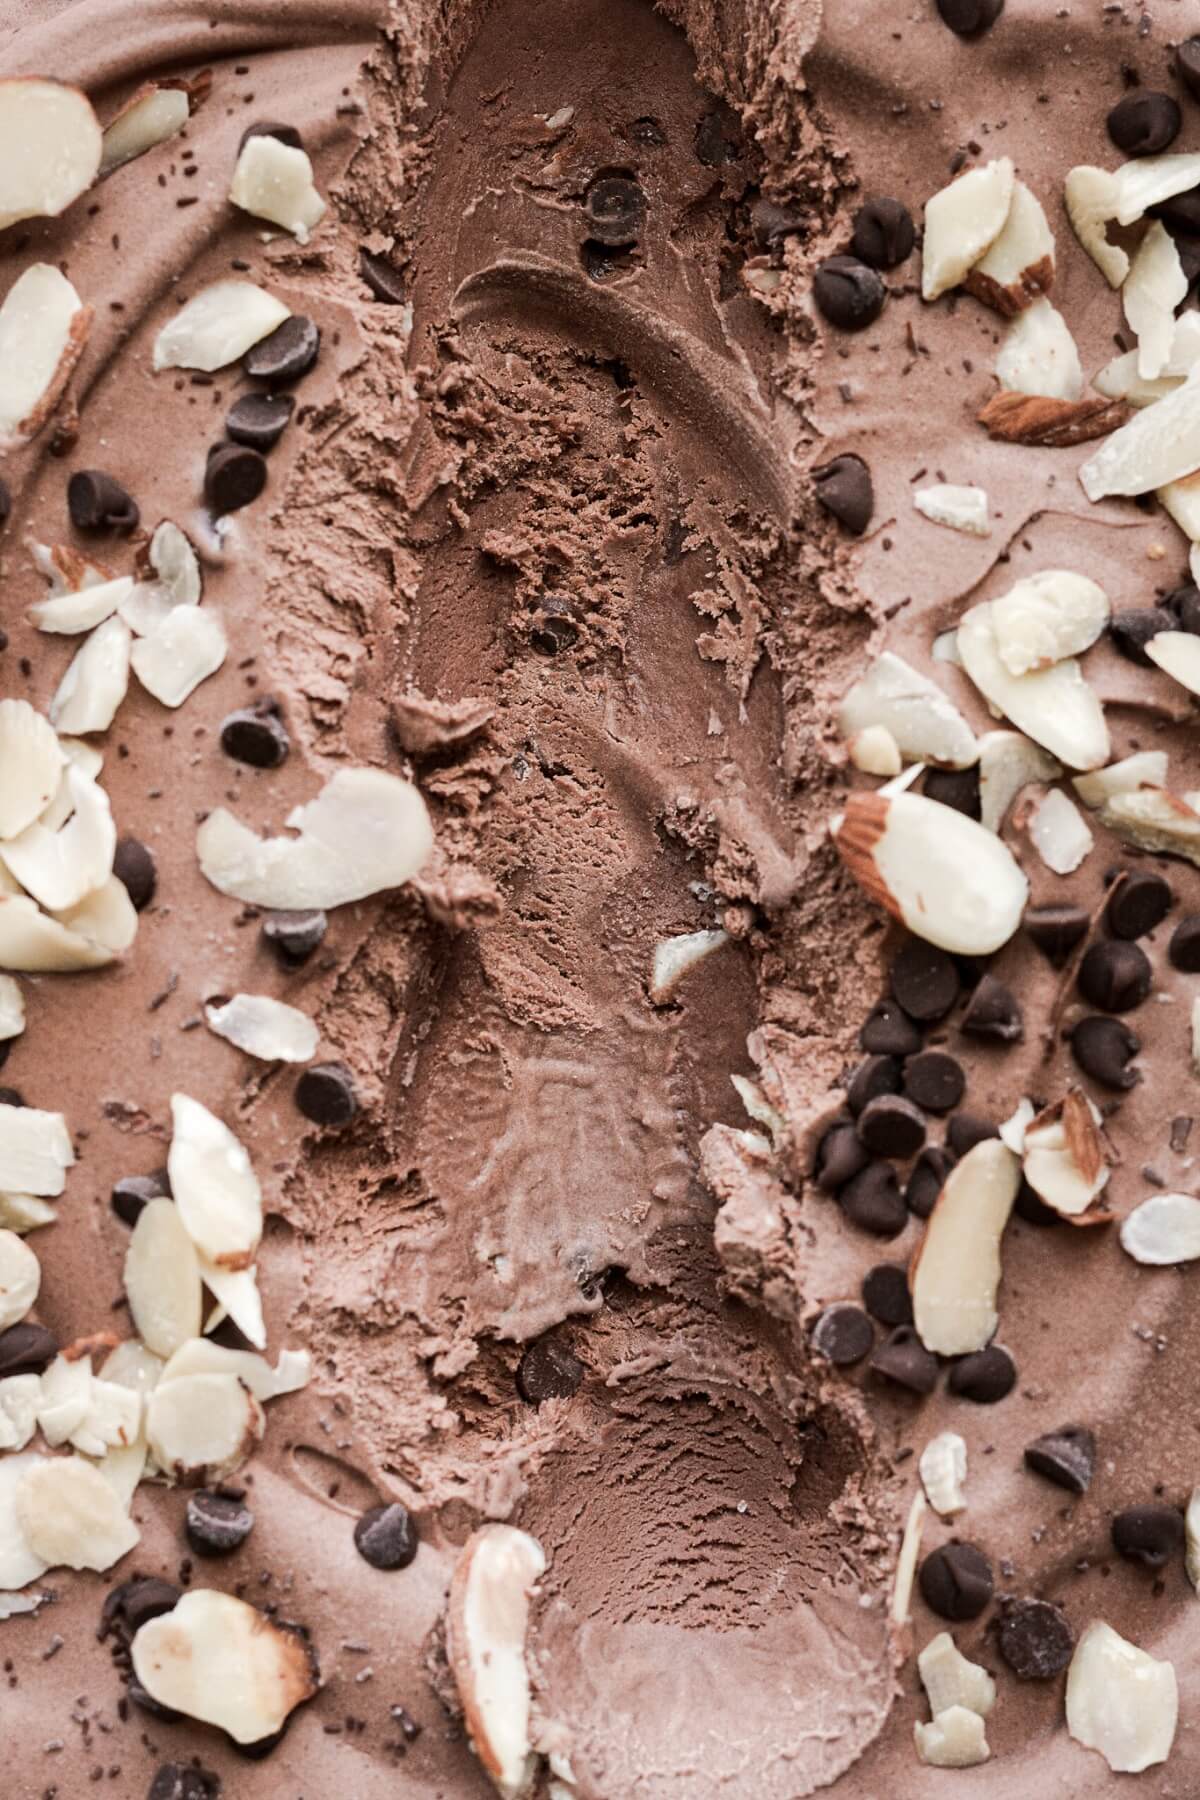 Chocolate almond amaretto ice cream sprinkled with sliced almonds and mini chocolate chips.